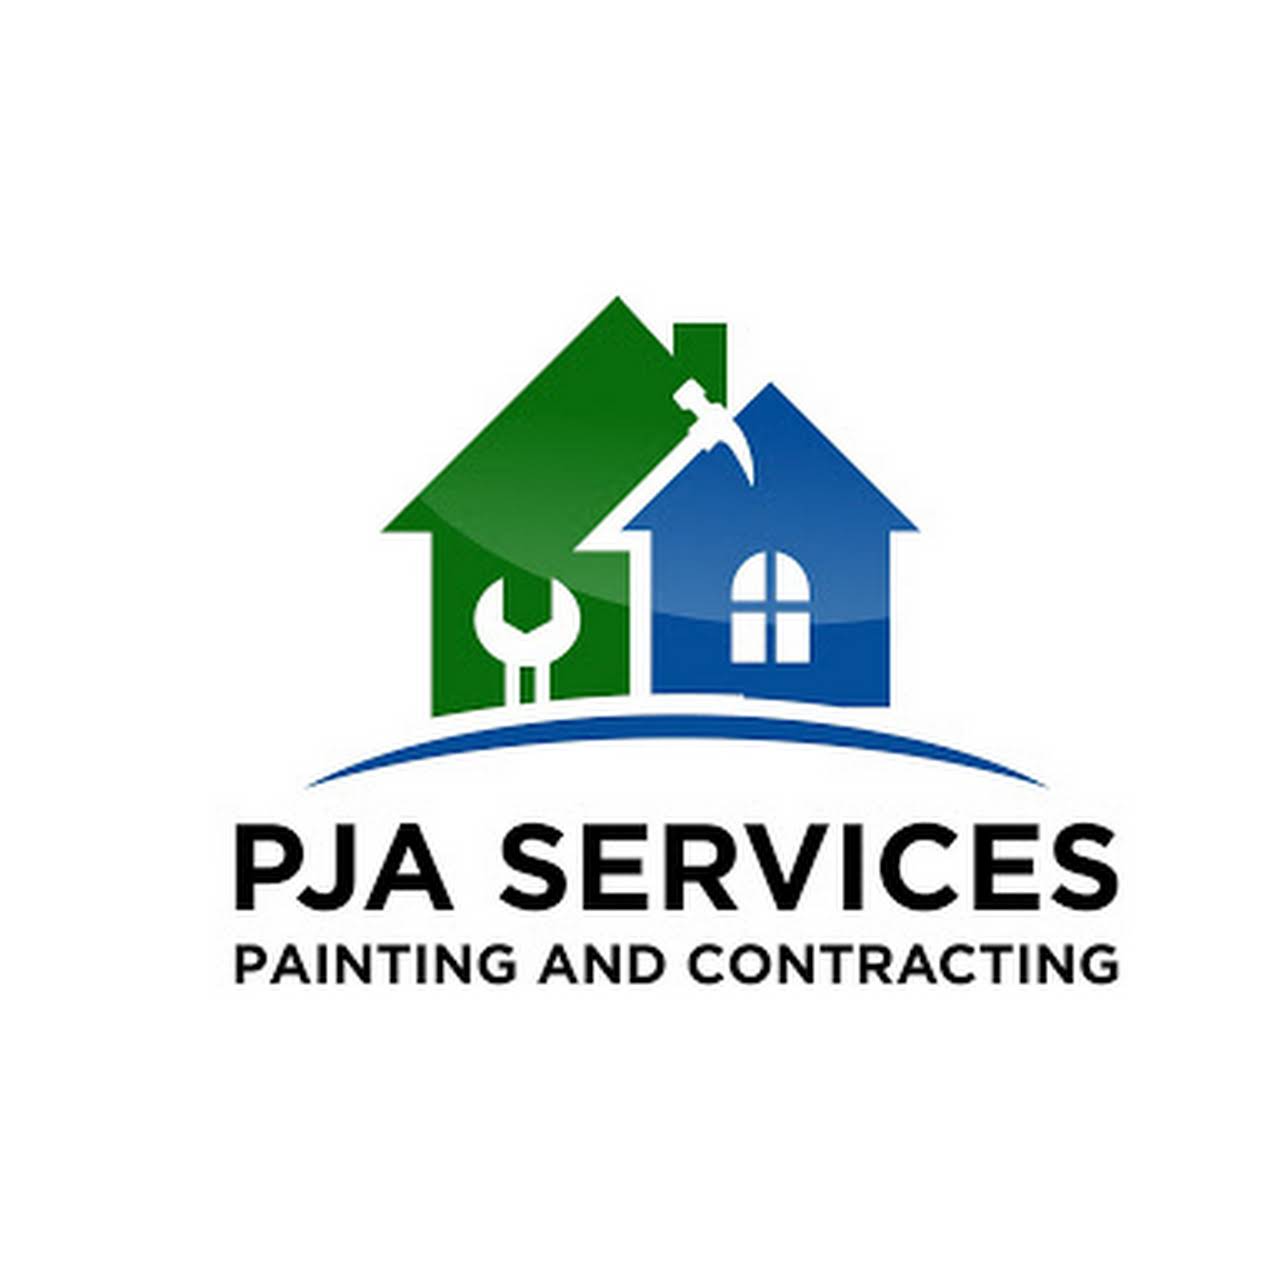 PJA Services Painting & Contracting